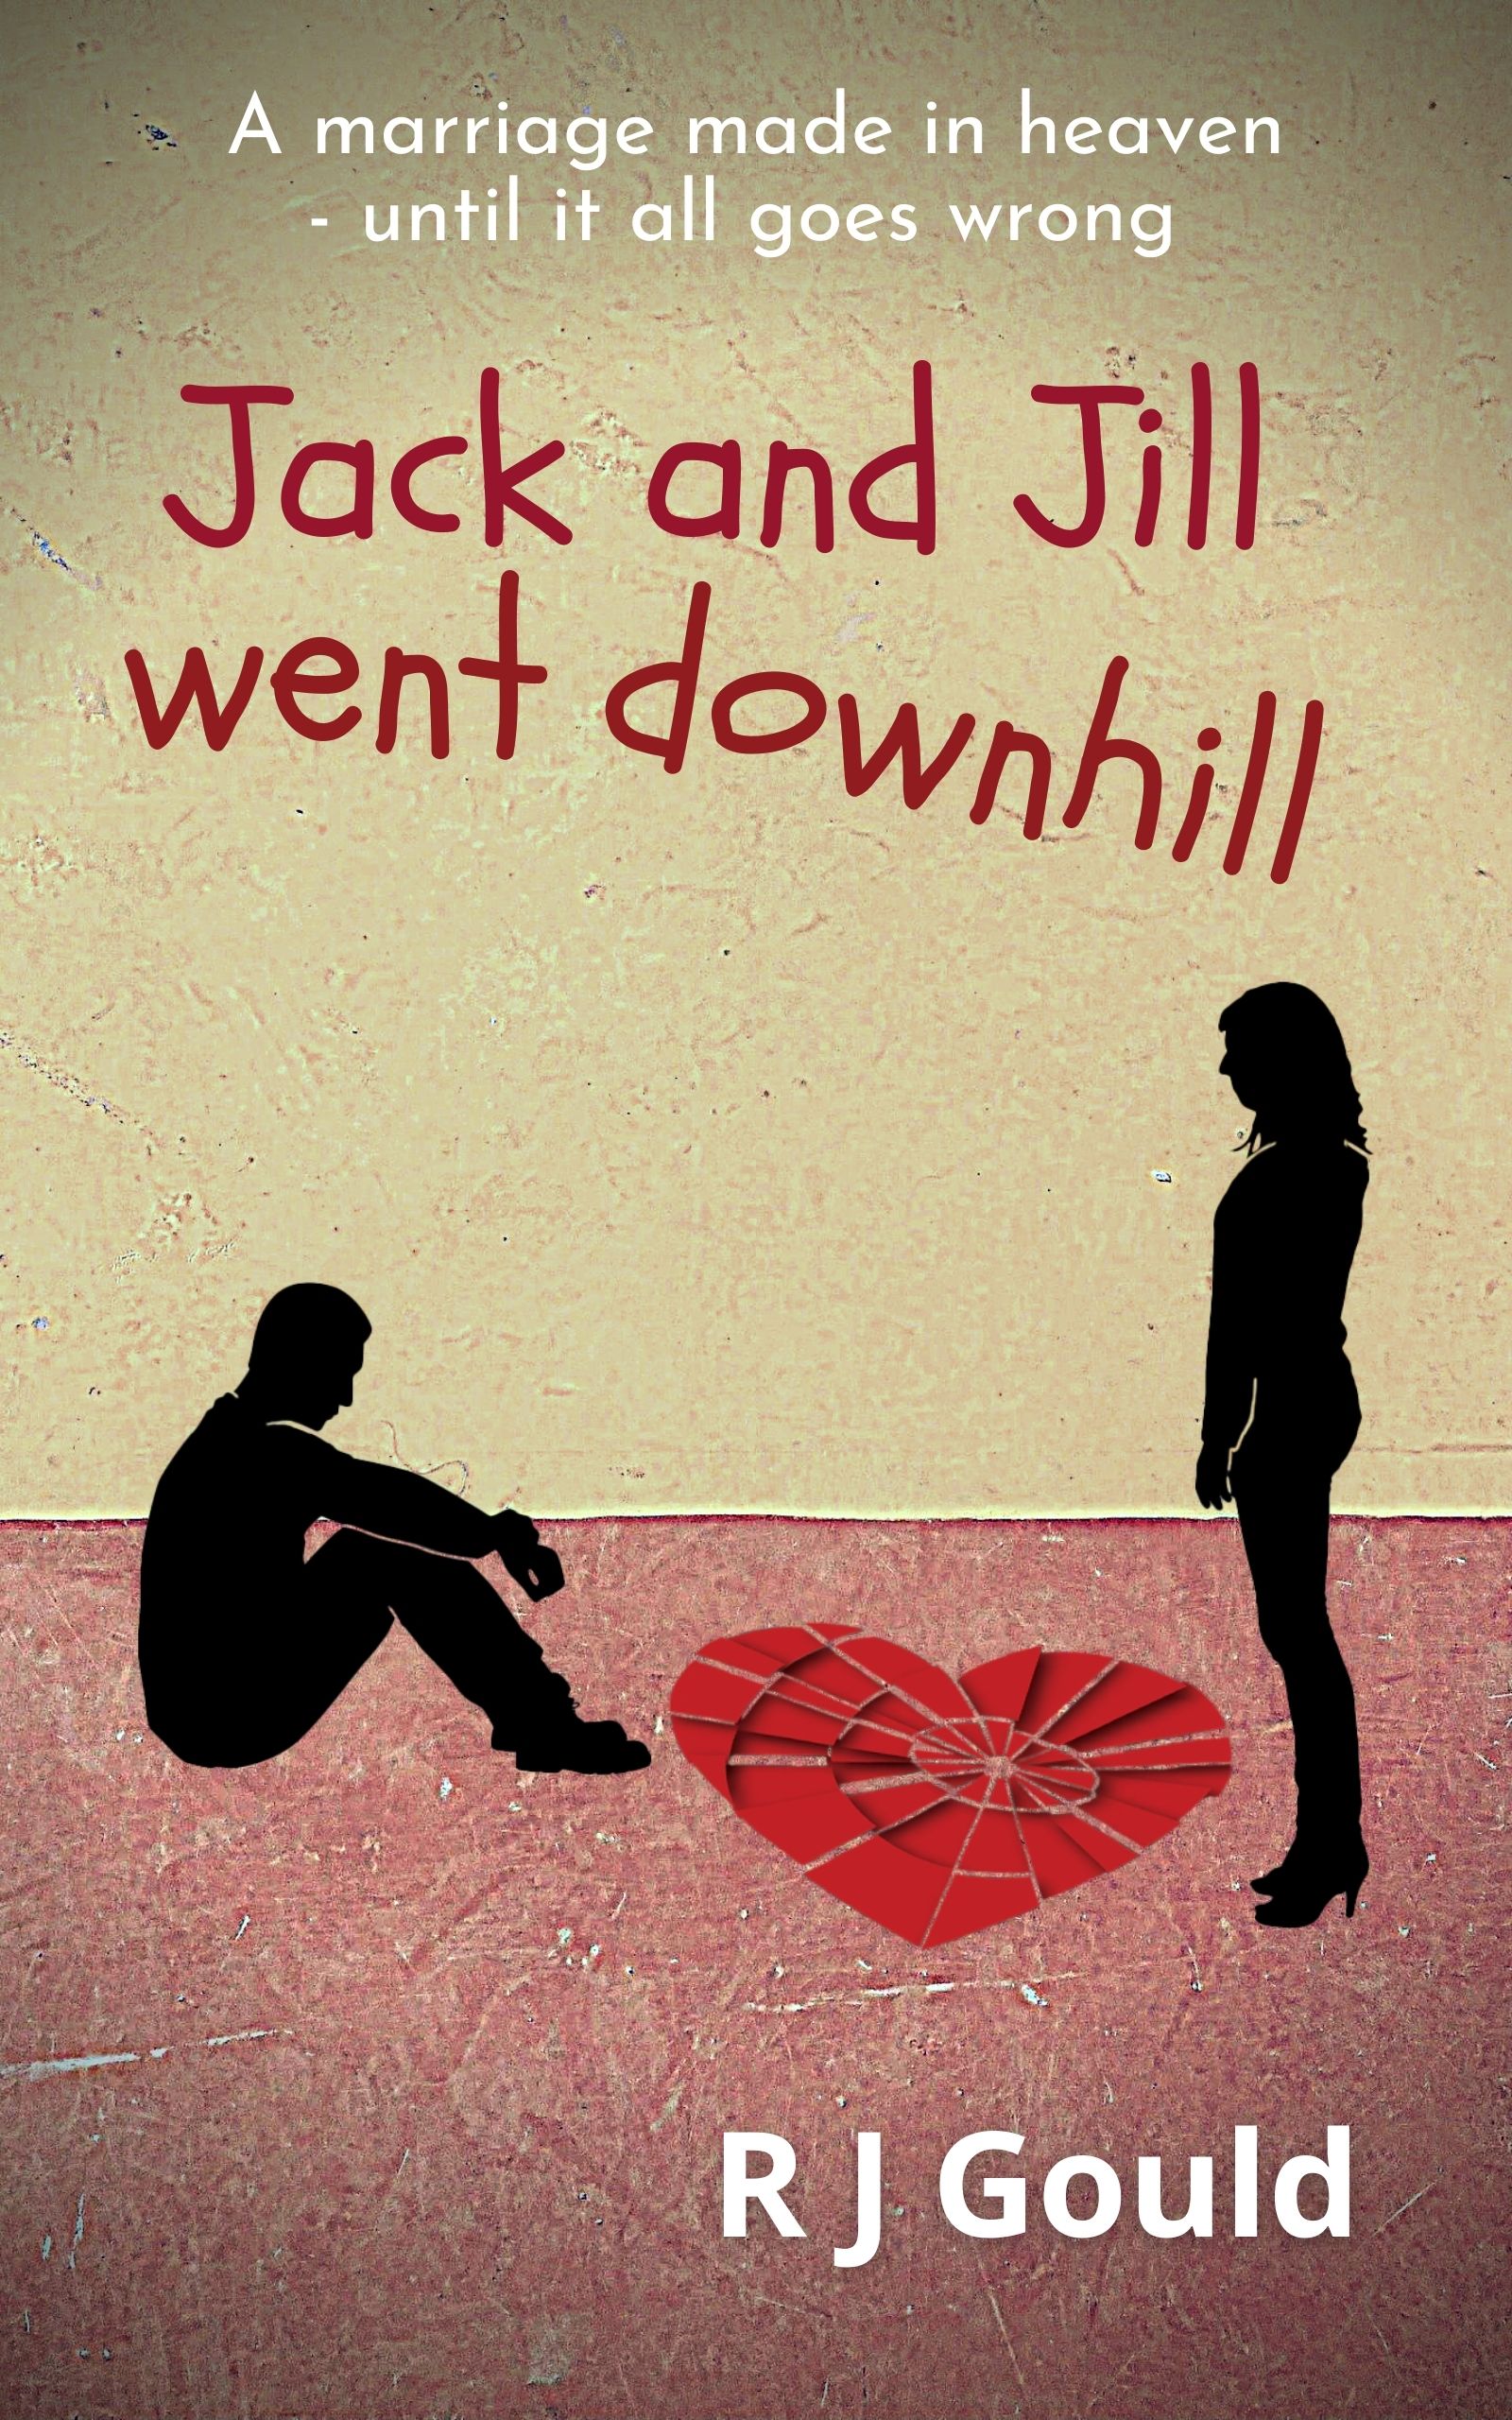 Jack and Jill went Downhill by RJ Gould